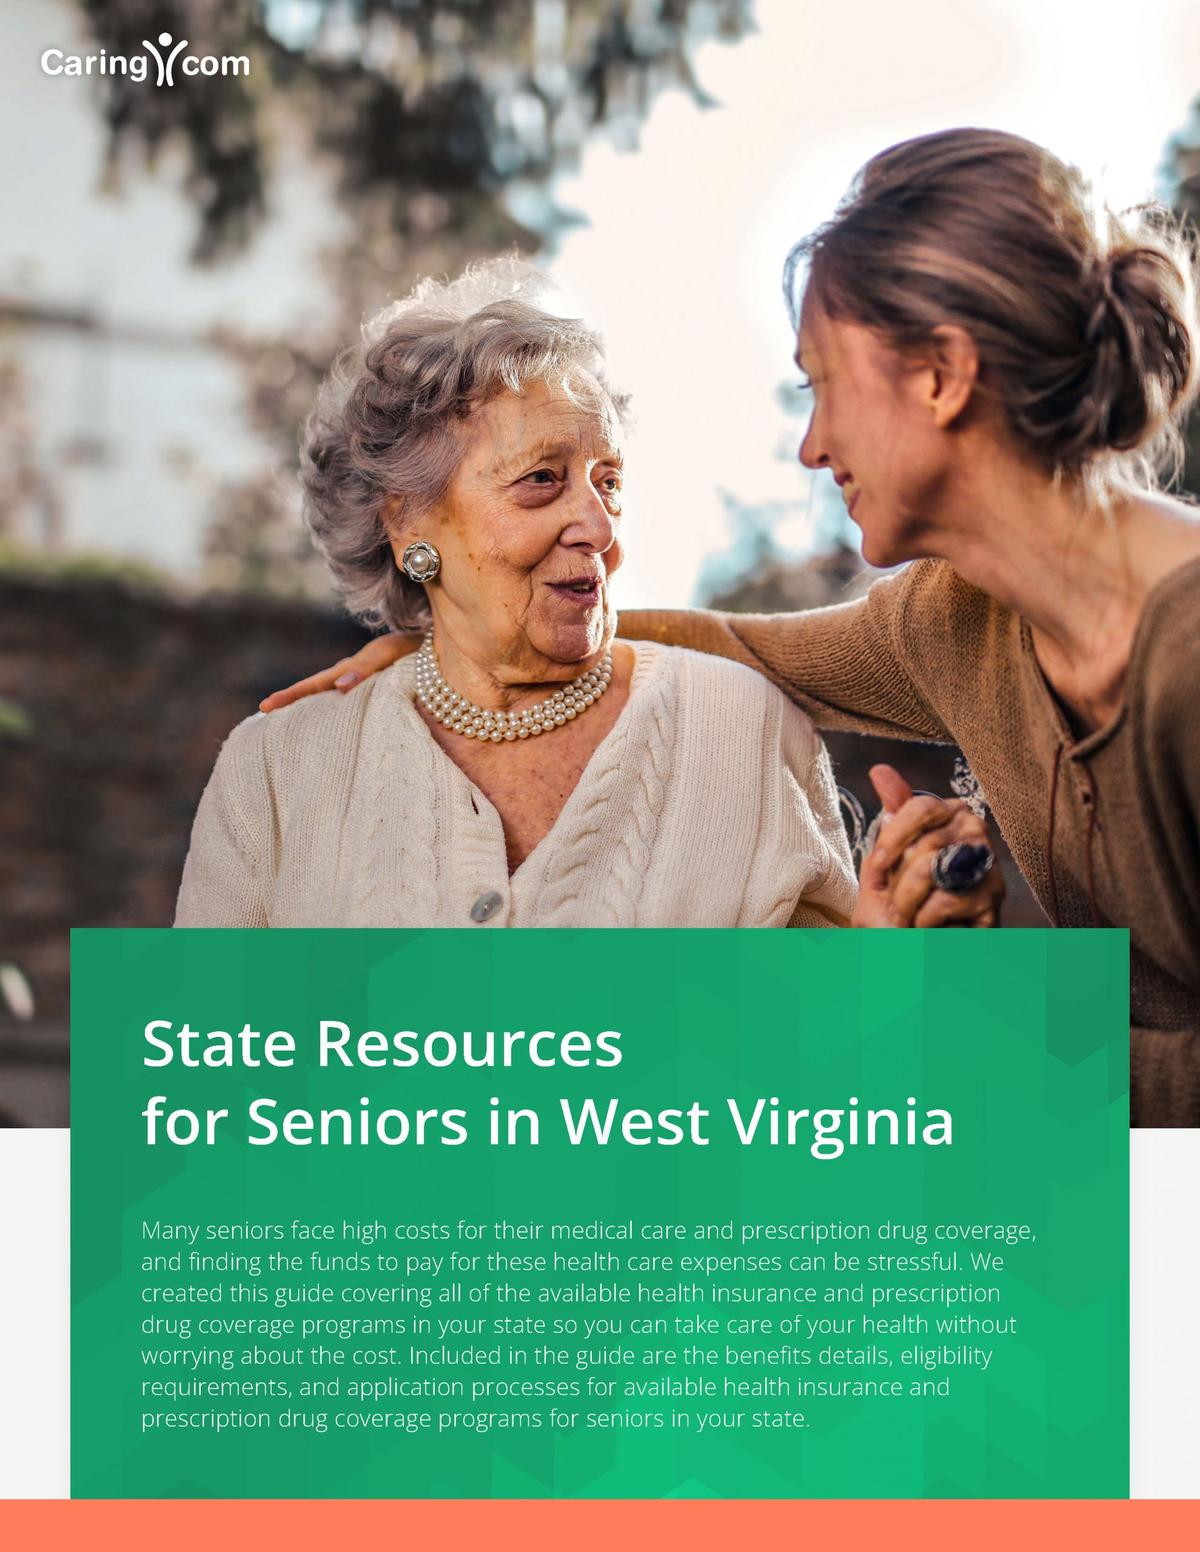 Financial Assistance for Prescriptions in West Virginia